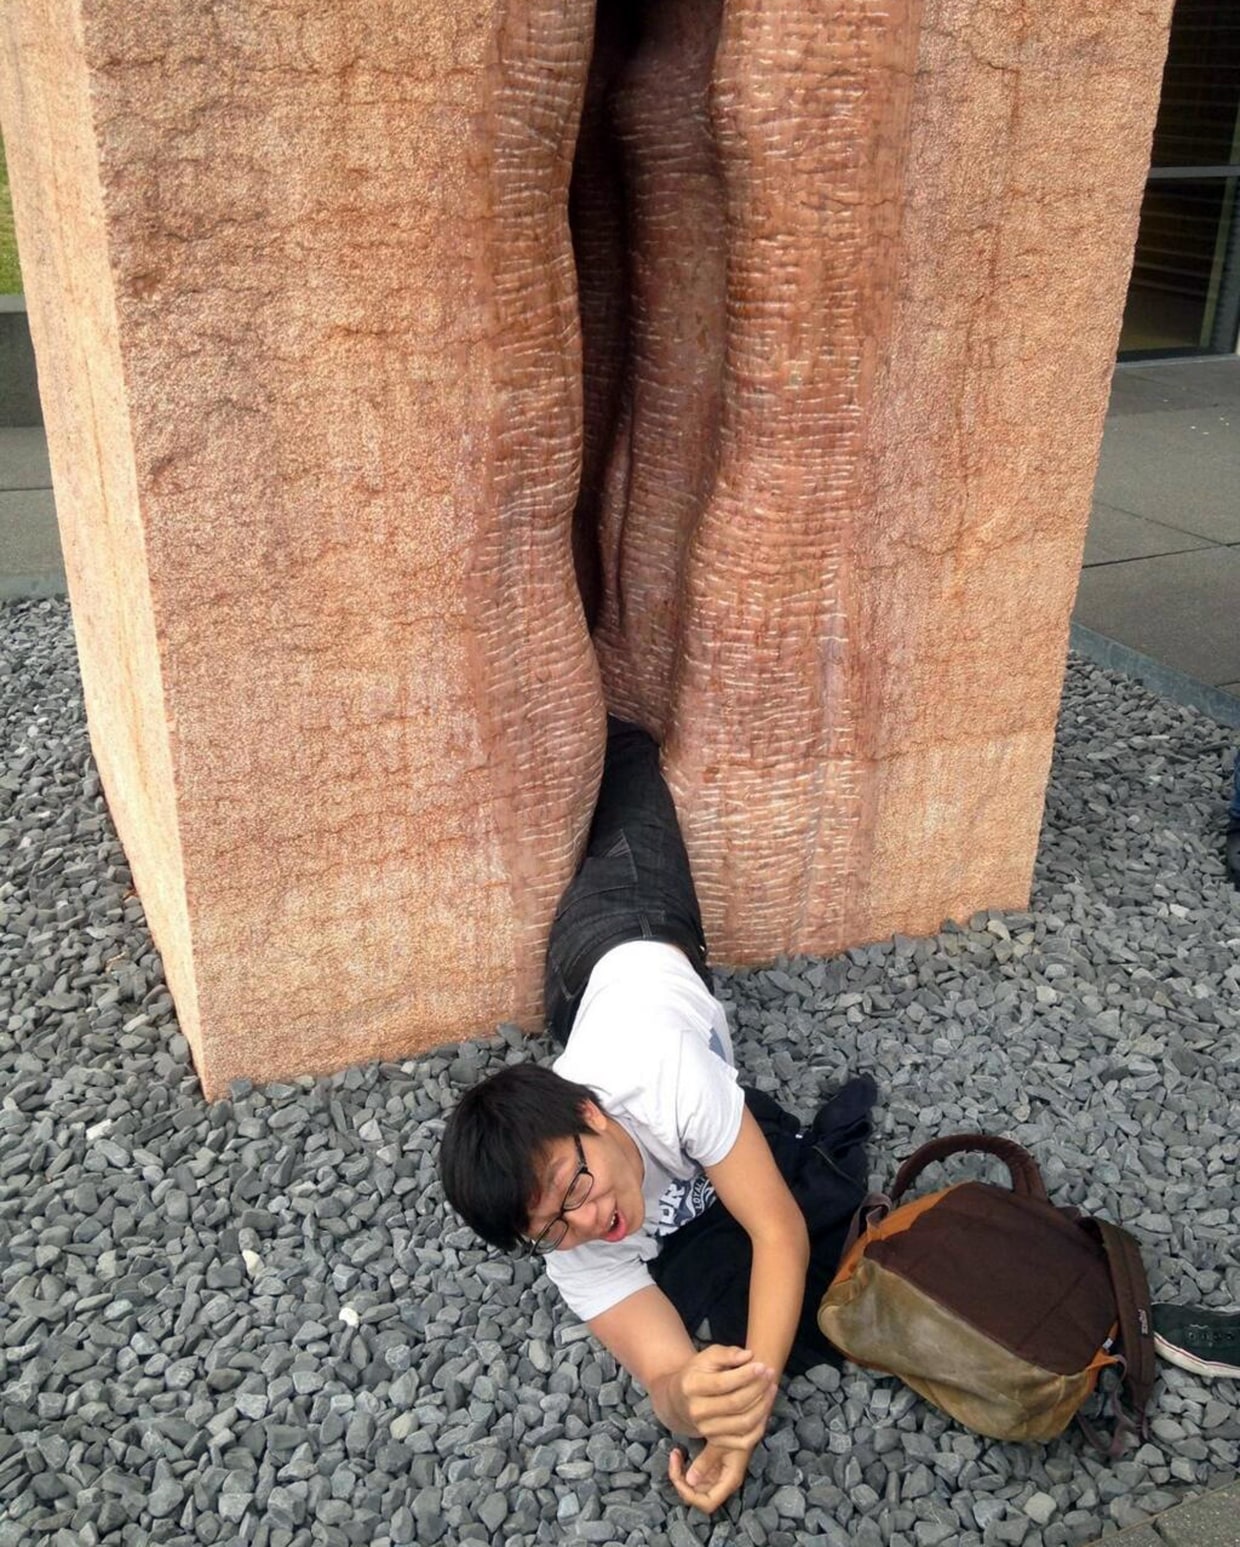 https://www.nbcnews.com/news/world/american-student-ends-trapped-giant-vagina-sculpture-n138311